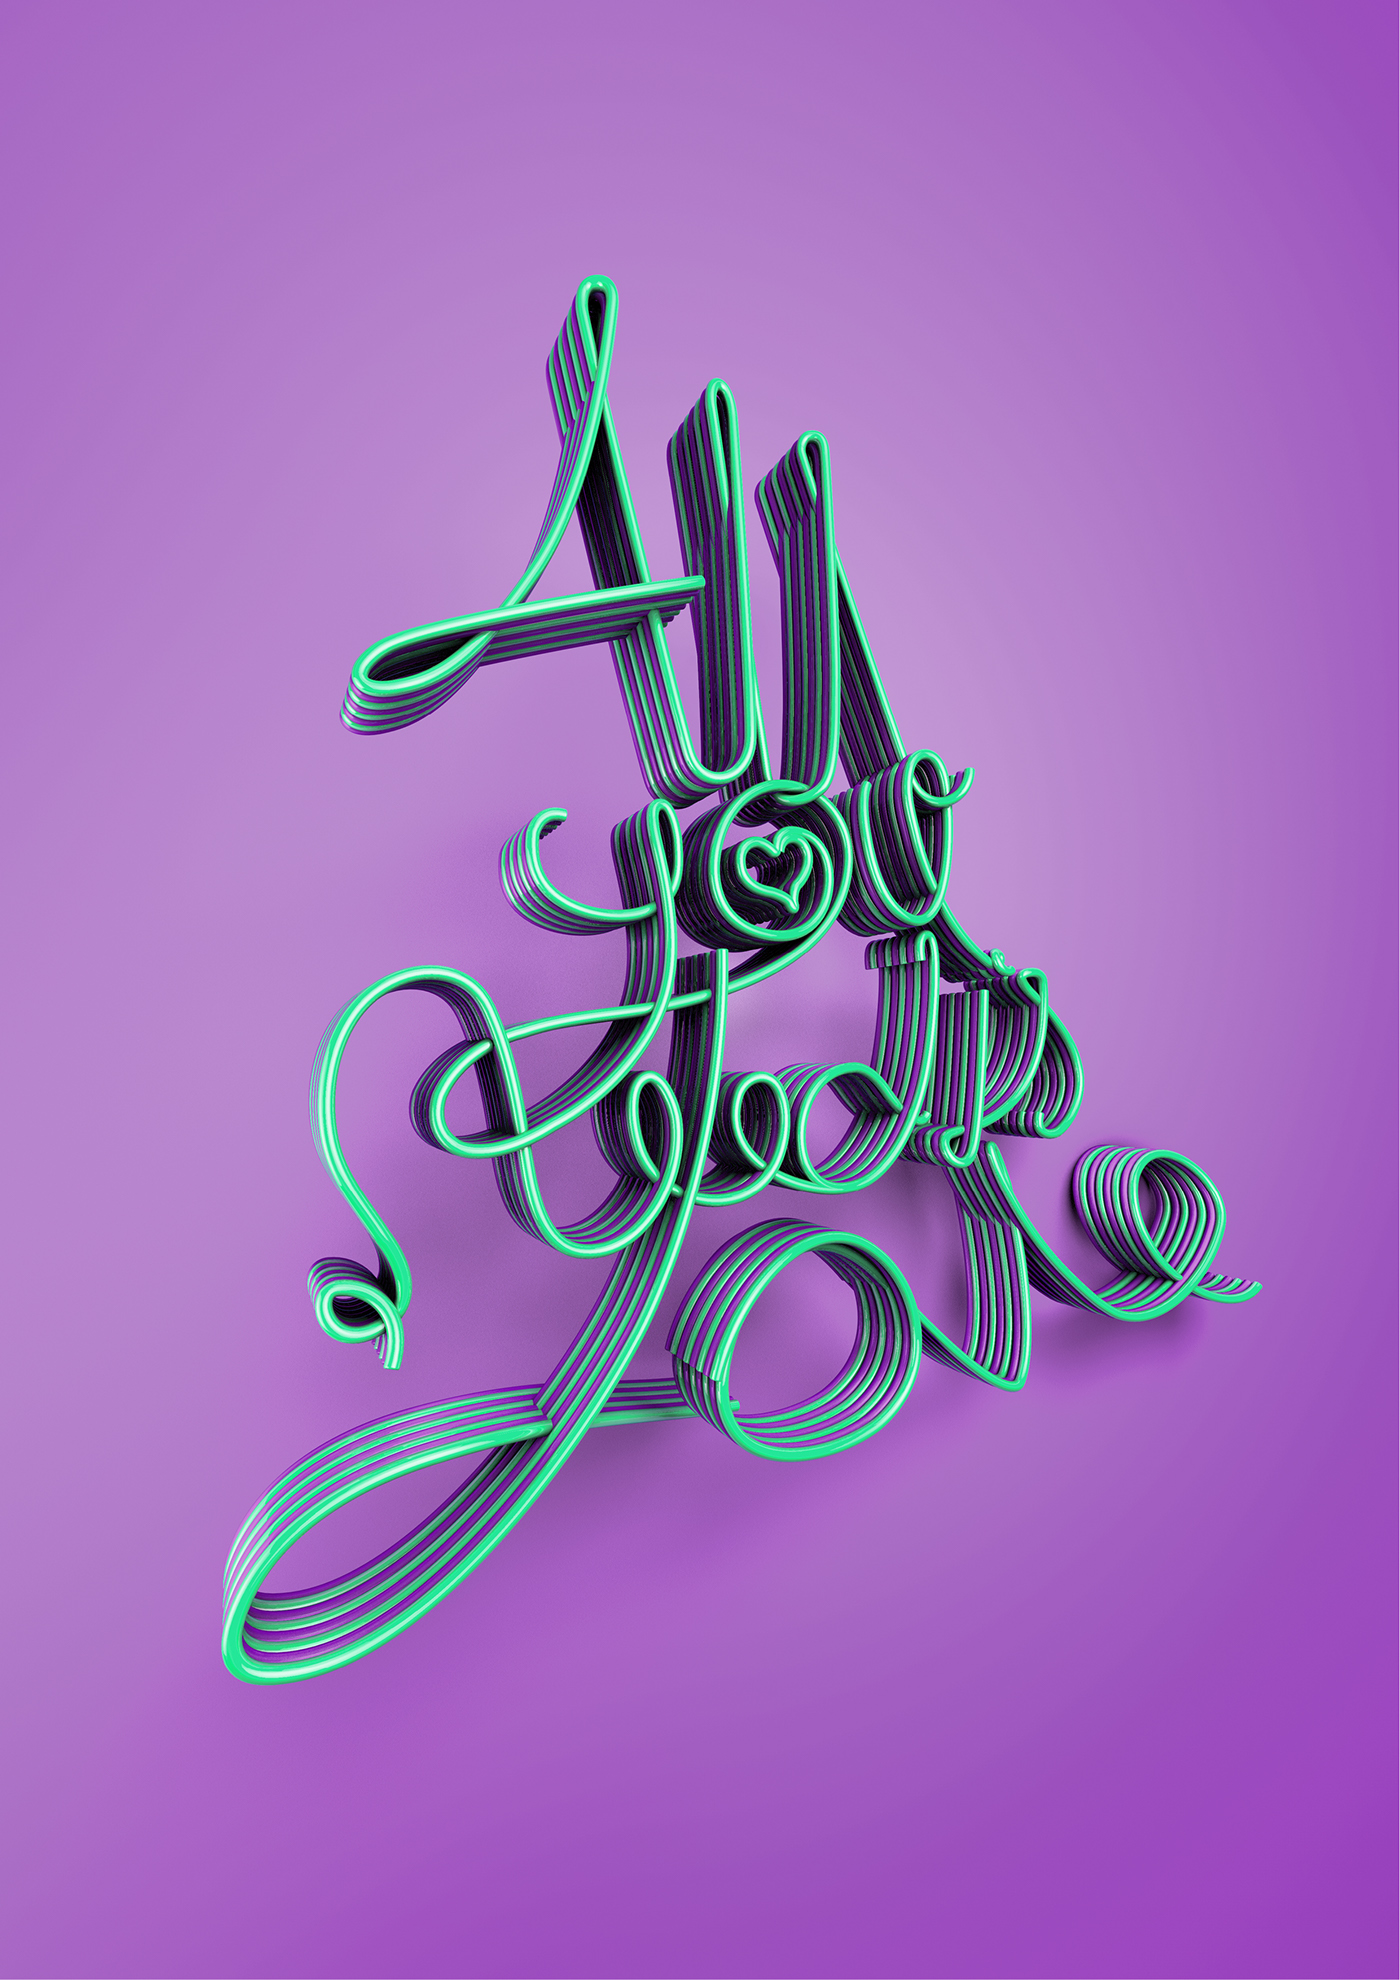 Love type letters flowing text Beatles hand written colour